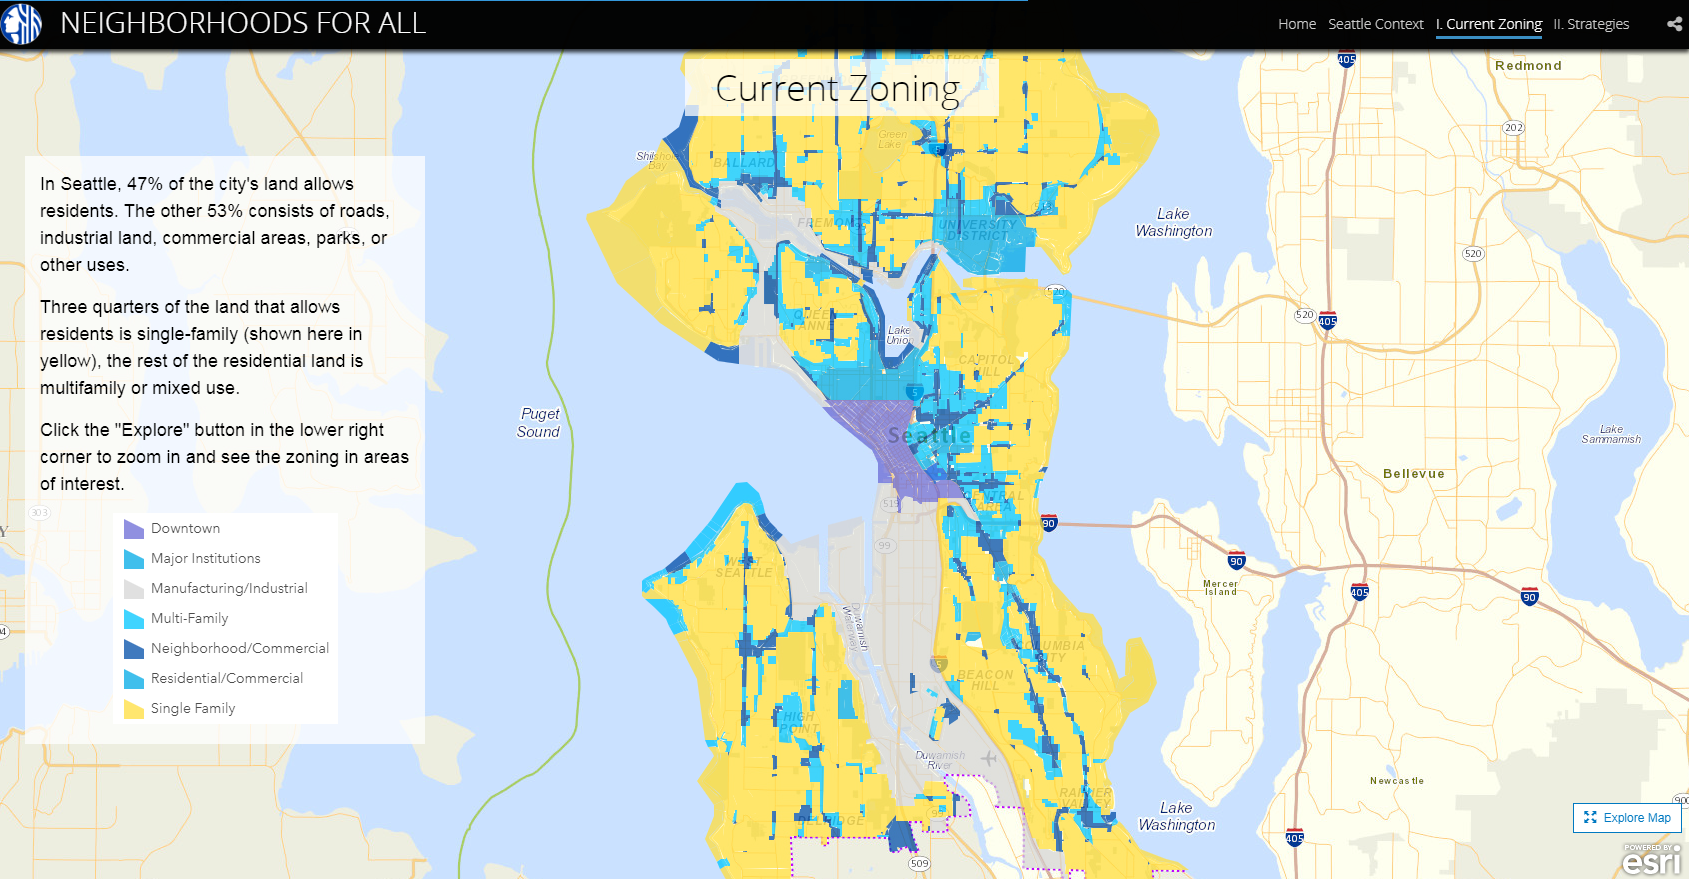 city of seattle zoning map Neighborhoods For All Planningcommission Seattle Gov city of seattle zoning map